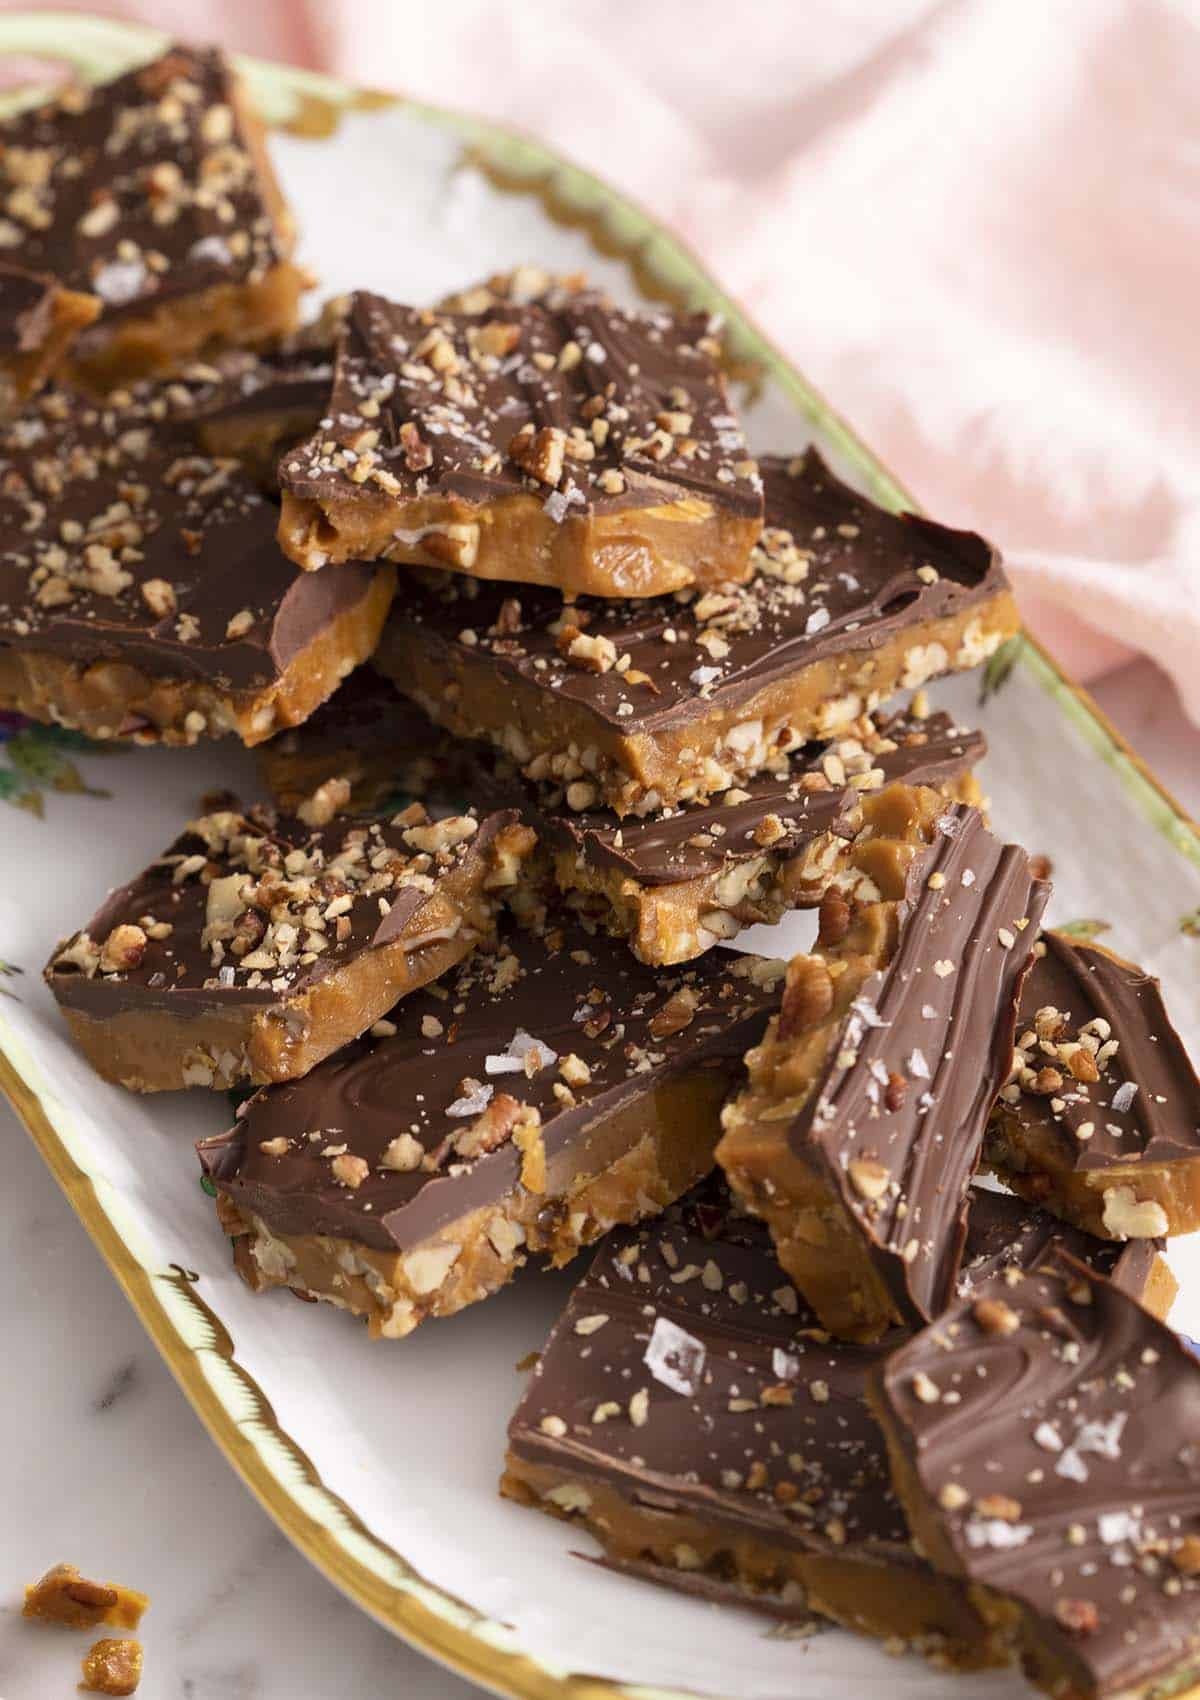 Toffee pieces topped with chocolate on a tray.